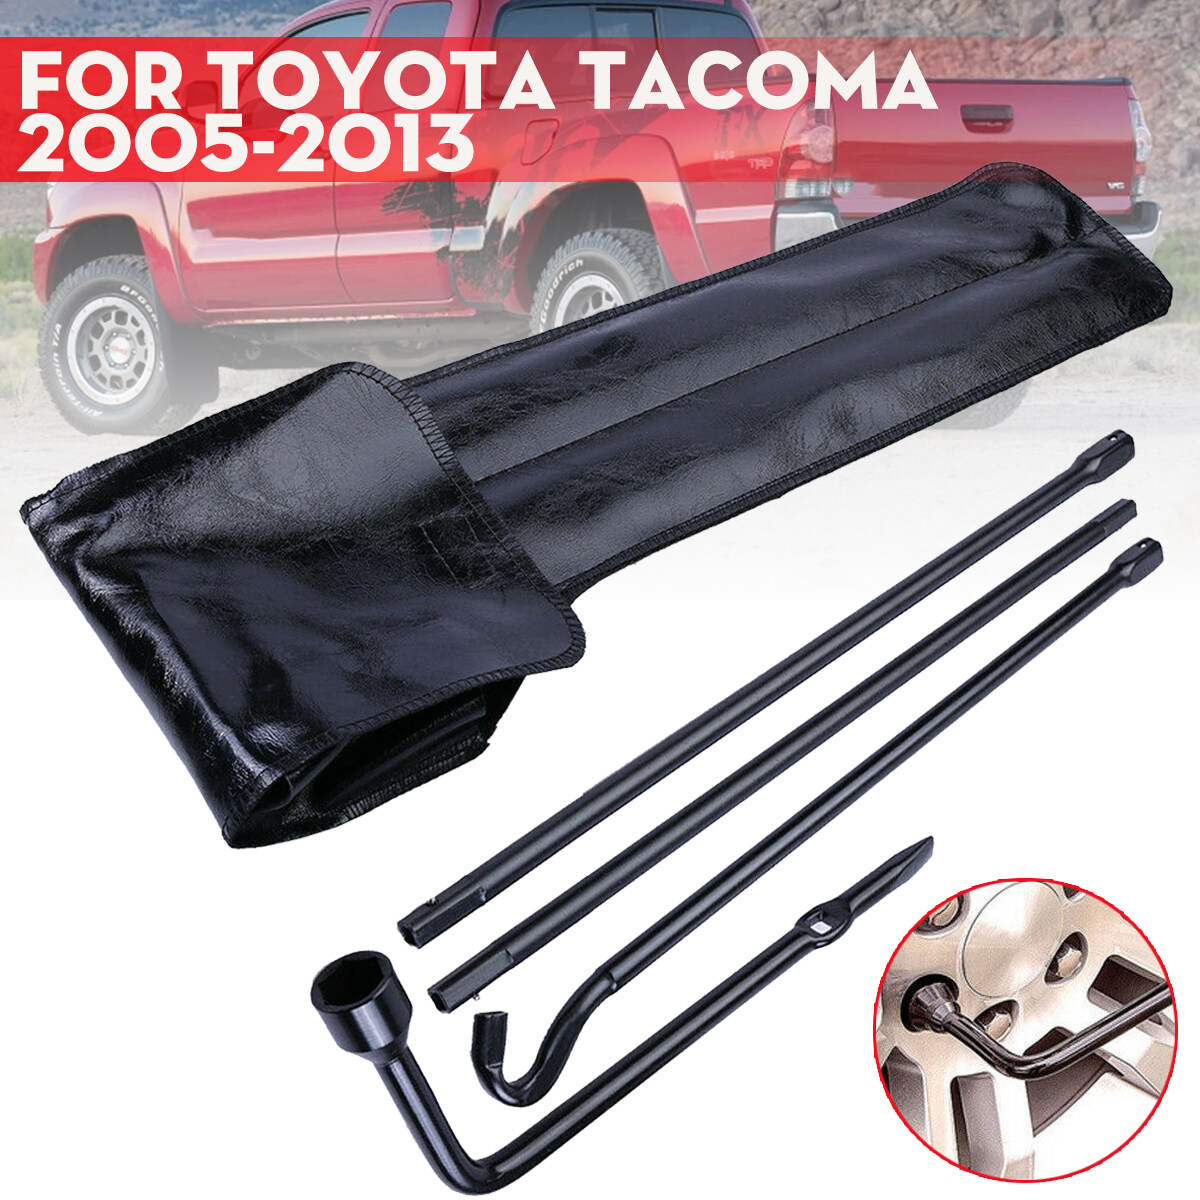 Tire Replacement Repair Jack Spare Lug Wrench Tire Tool Kit w/Bag Compatible with 05-13 Toyota Tacoma P/N: ET-CAR-TIRE002-BK HTTMT 